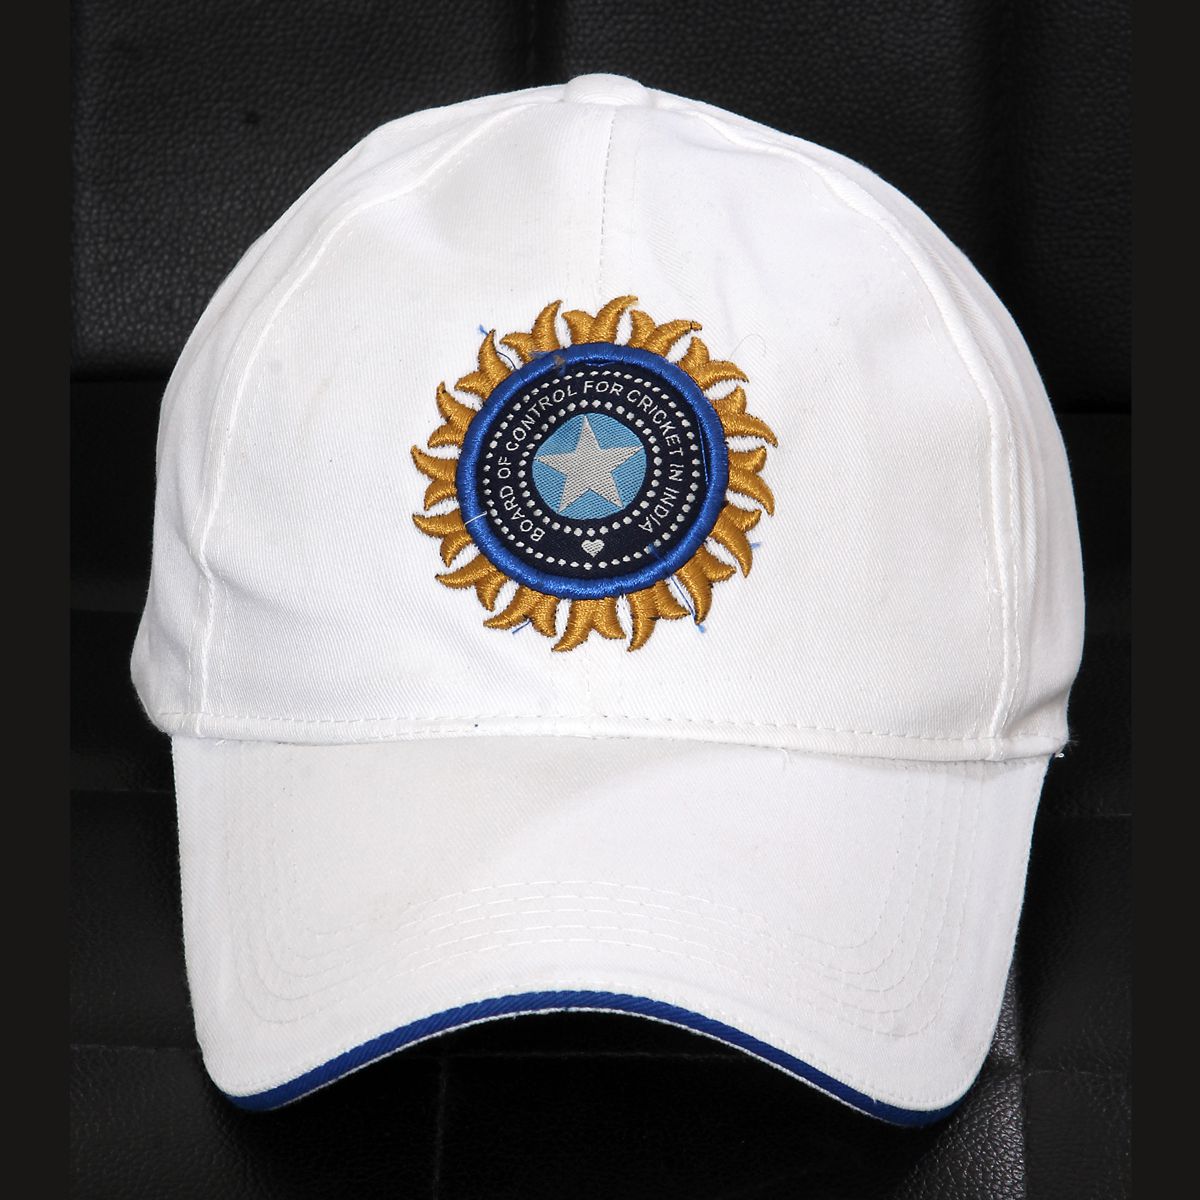 indian team white jersey